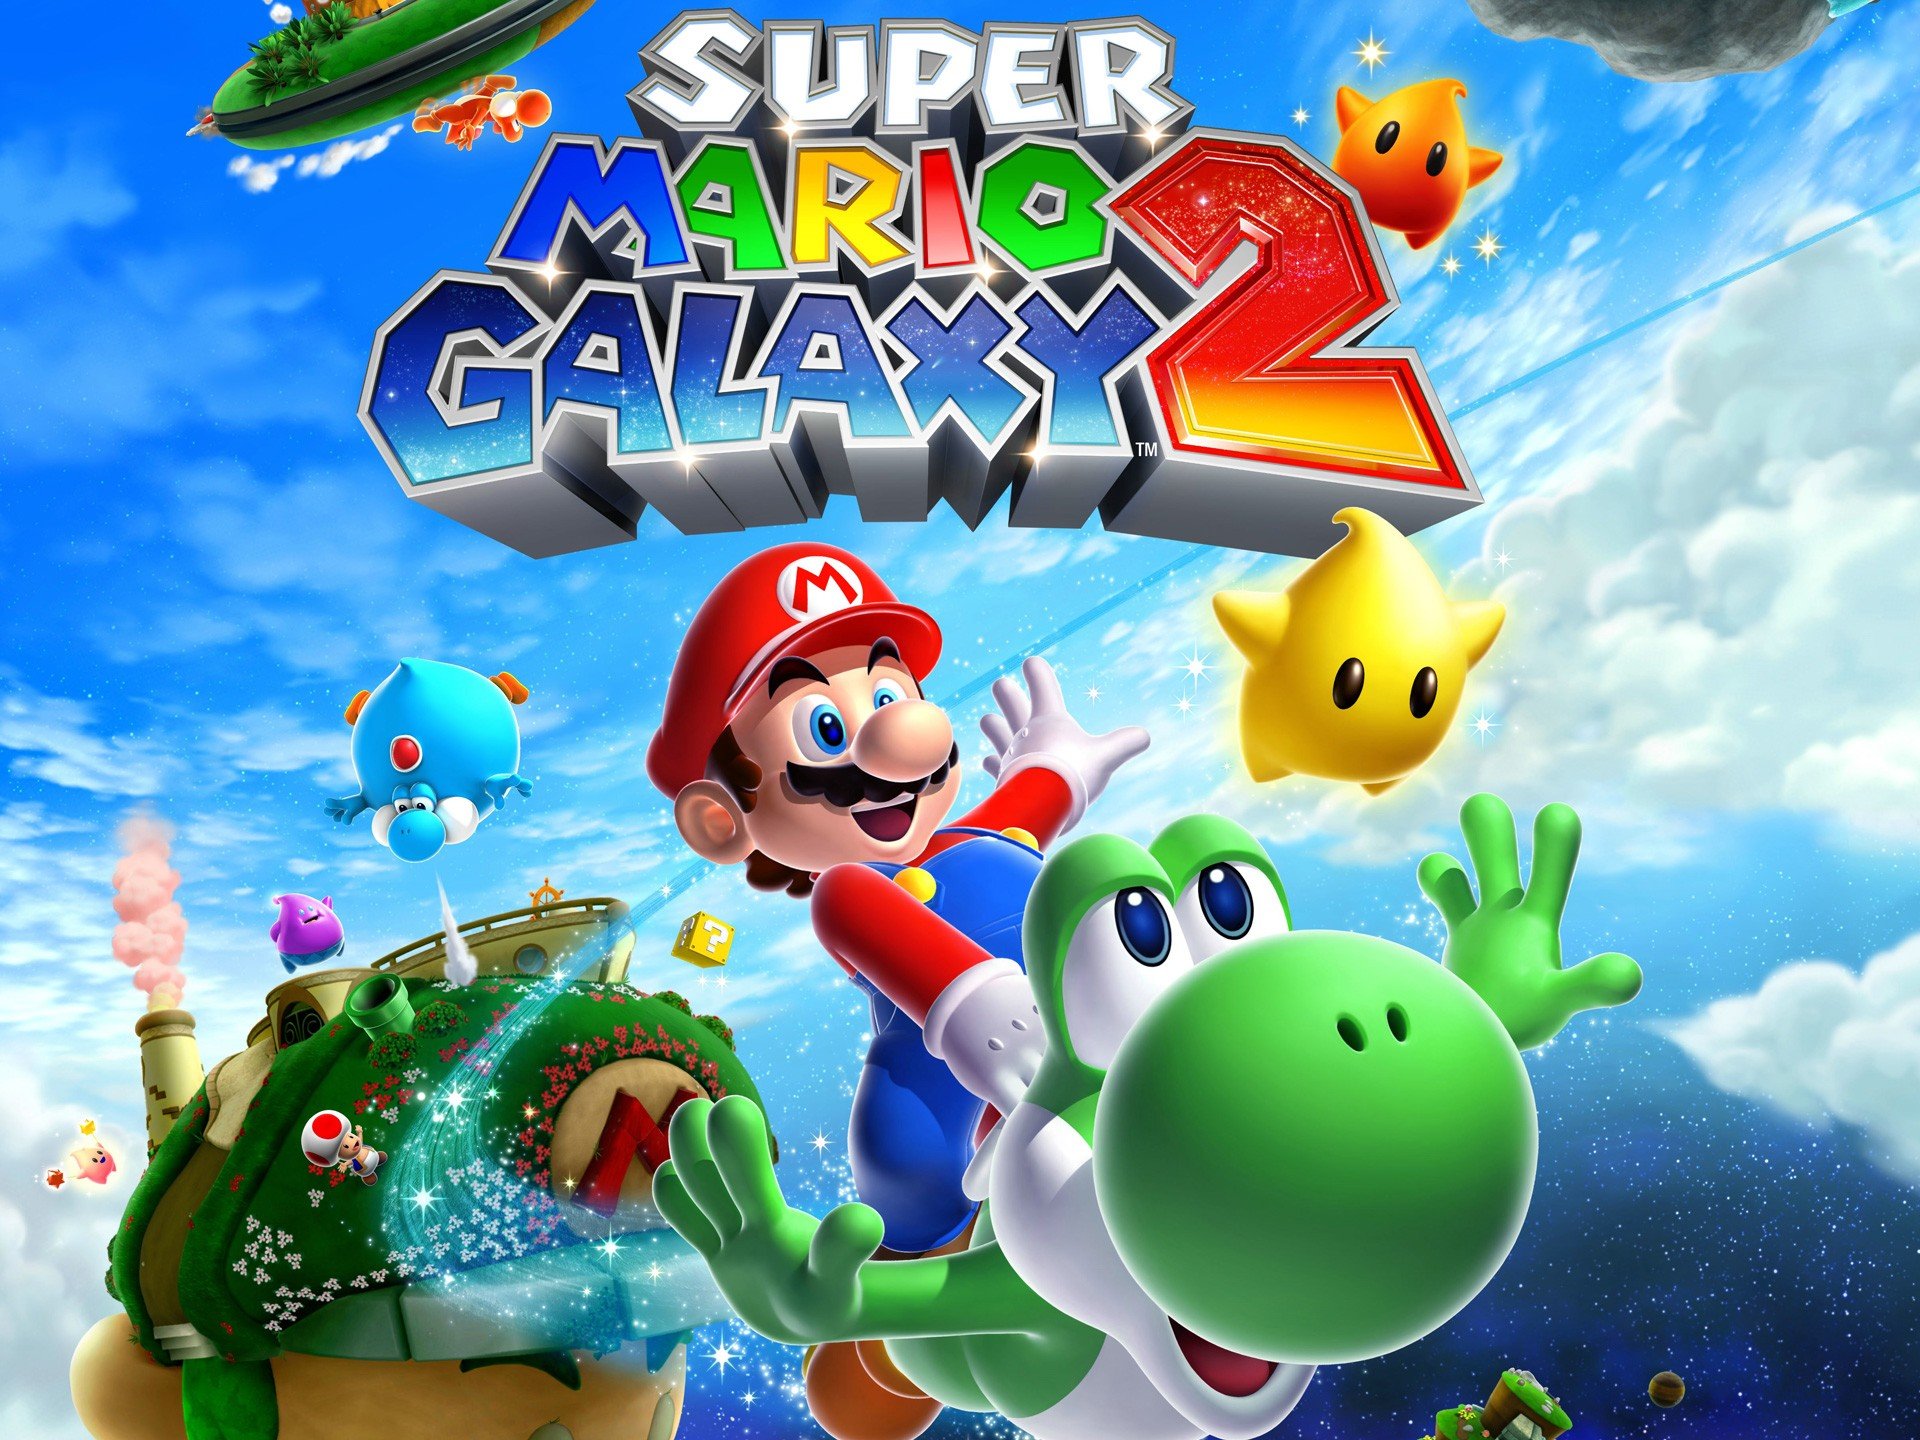 Download hd 1920x1440 Super Mario Galaxy 2 computer background ID:7749 for free